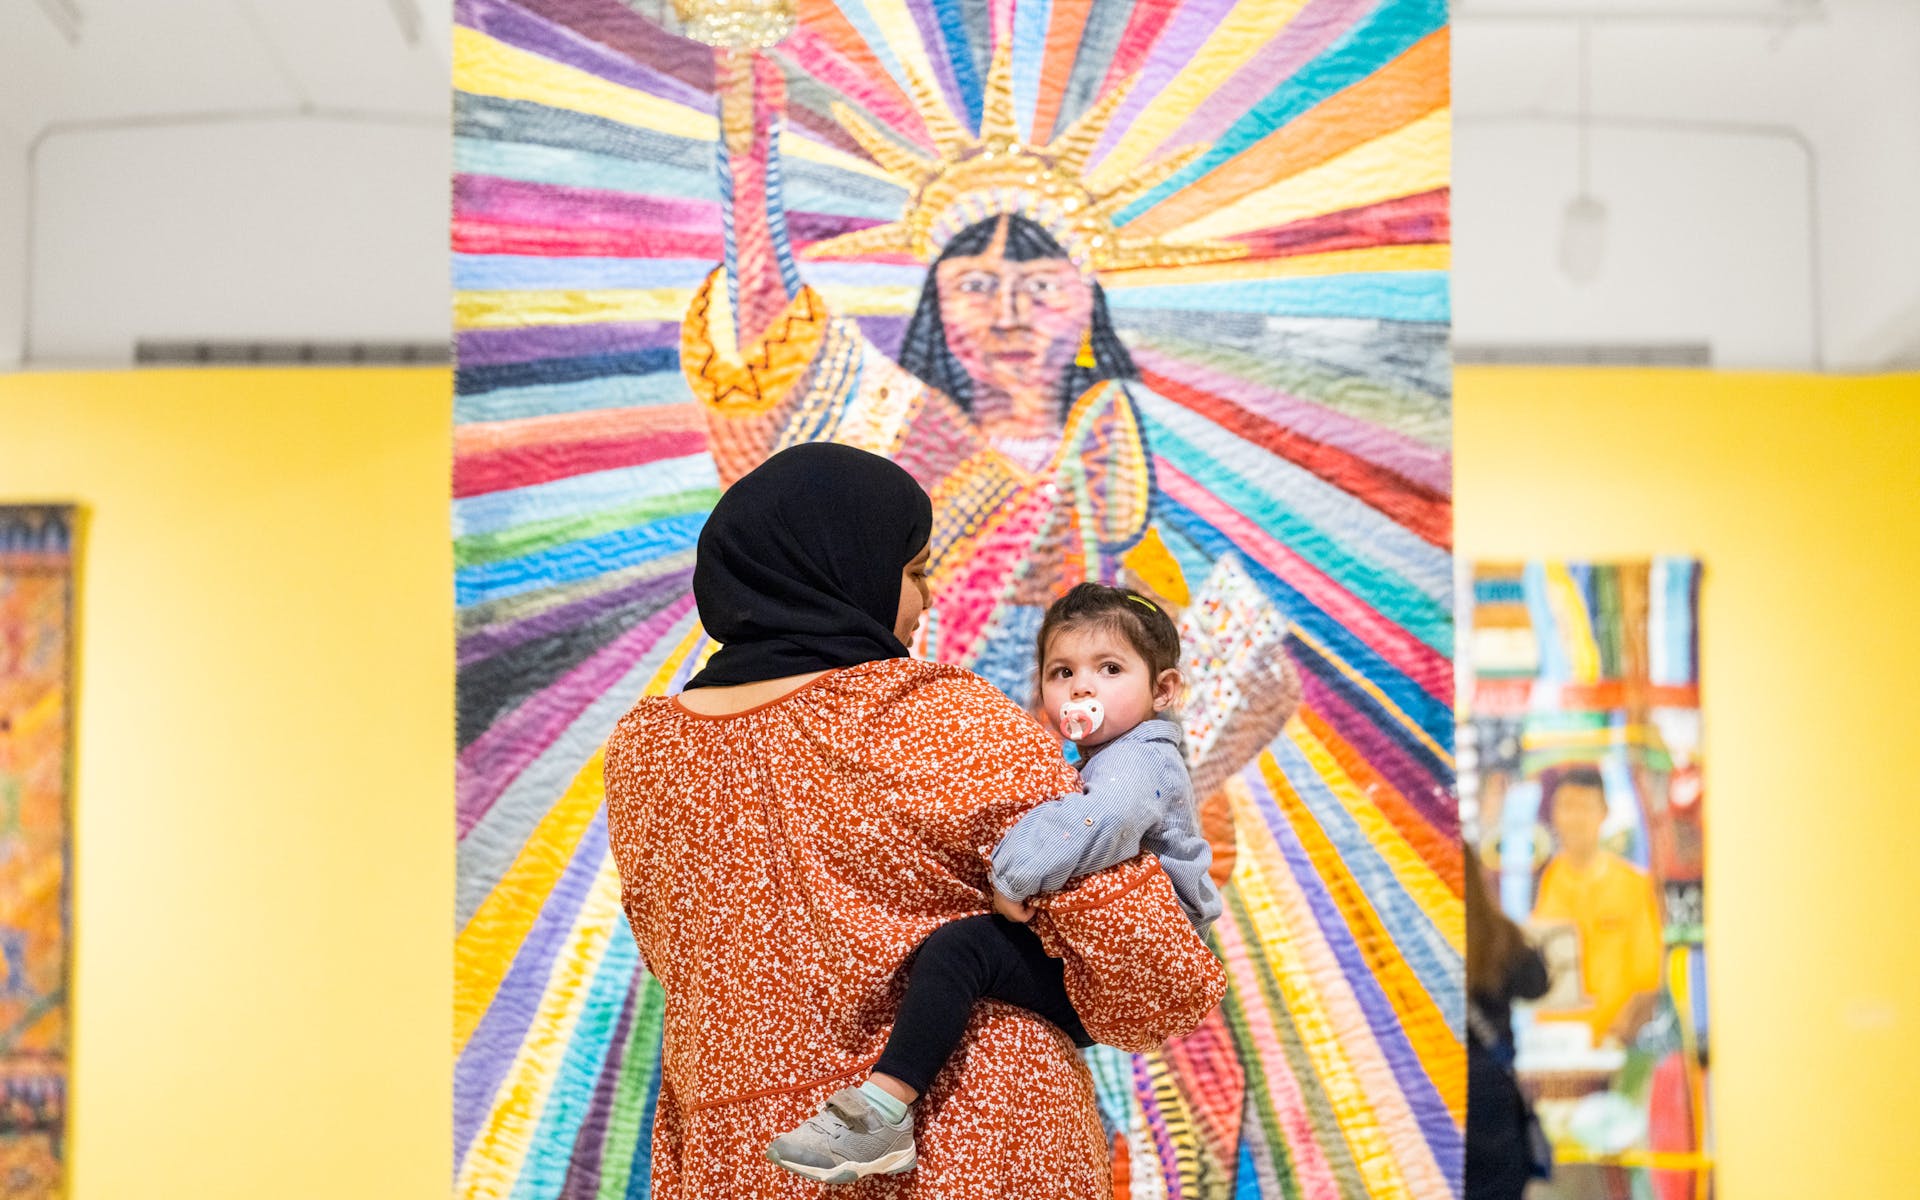 With their back to the viewer, a woman wearing a head covering holds a baby in her arms as she looks at a painting of the stature of liberty depicted as brown skined while the baby looks over its shoulder at the viewer.